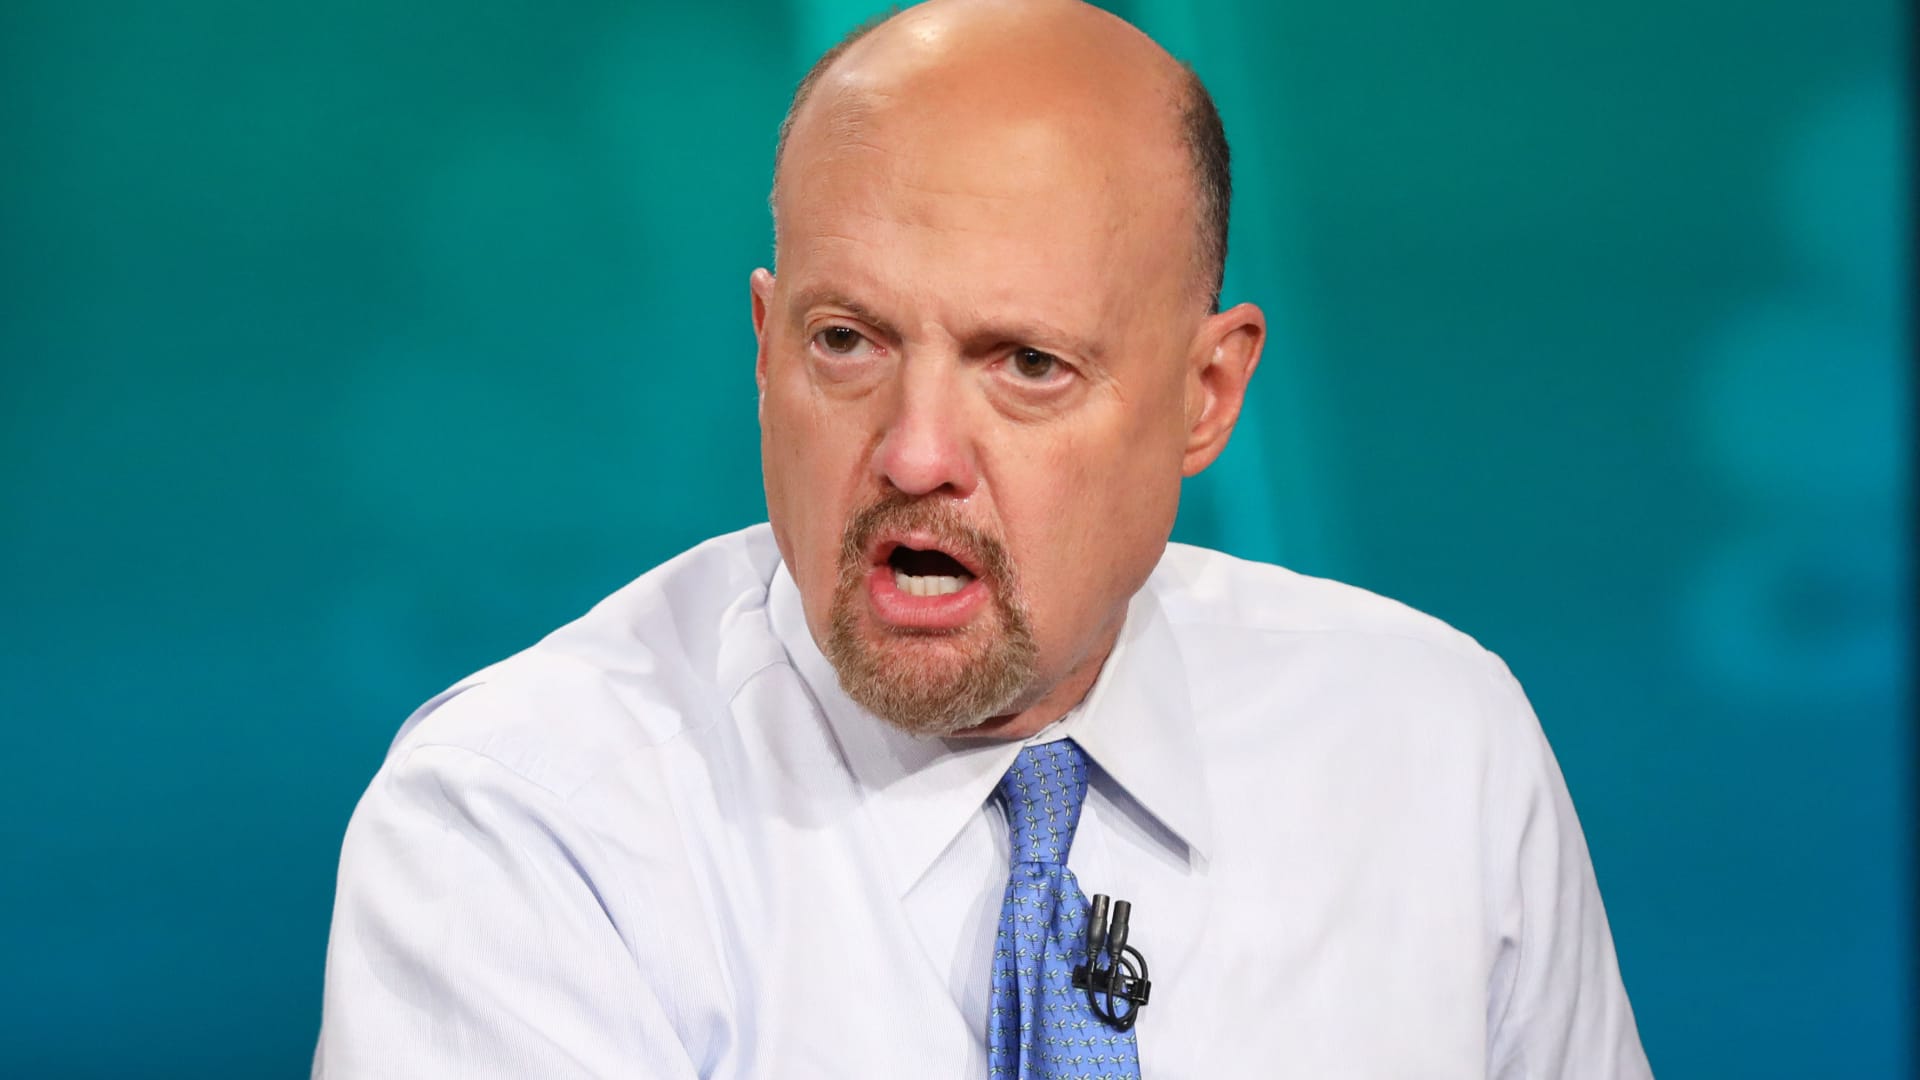 Jim Cramer's Investing Club meeting Friday: Fed strategy, Club mantra, buying opportunities